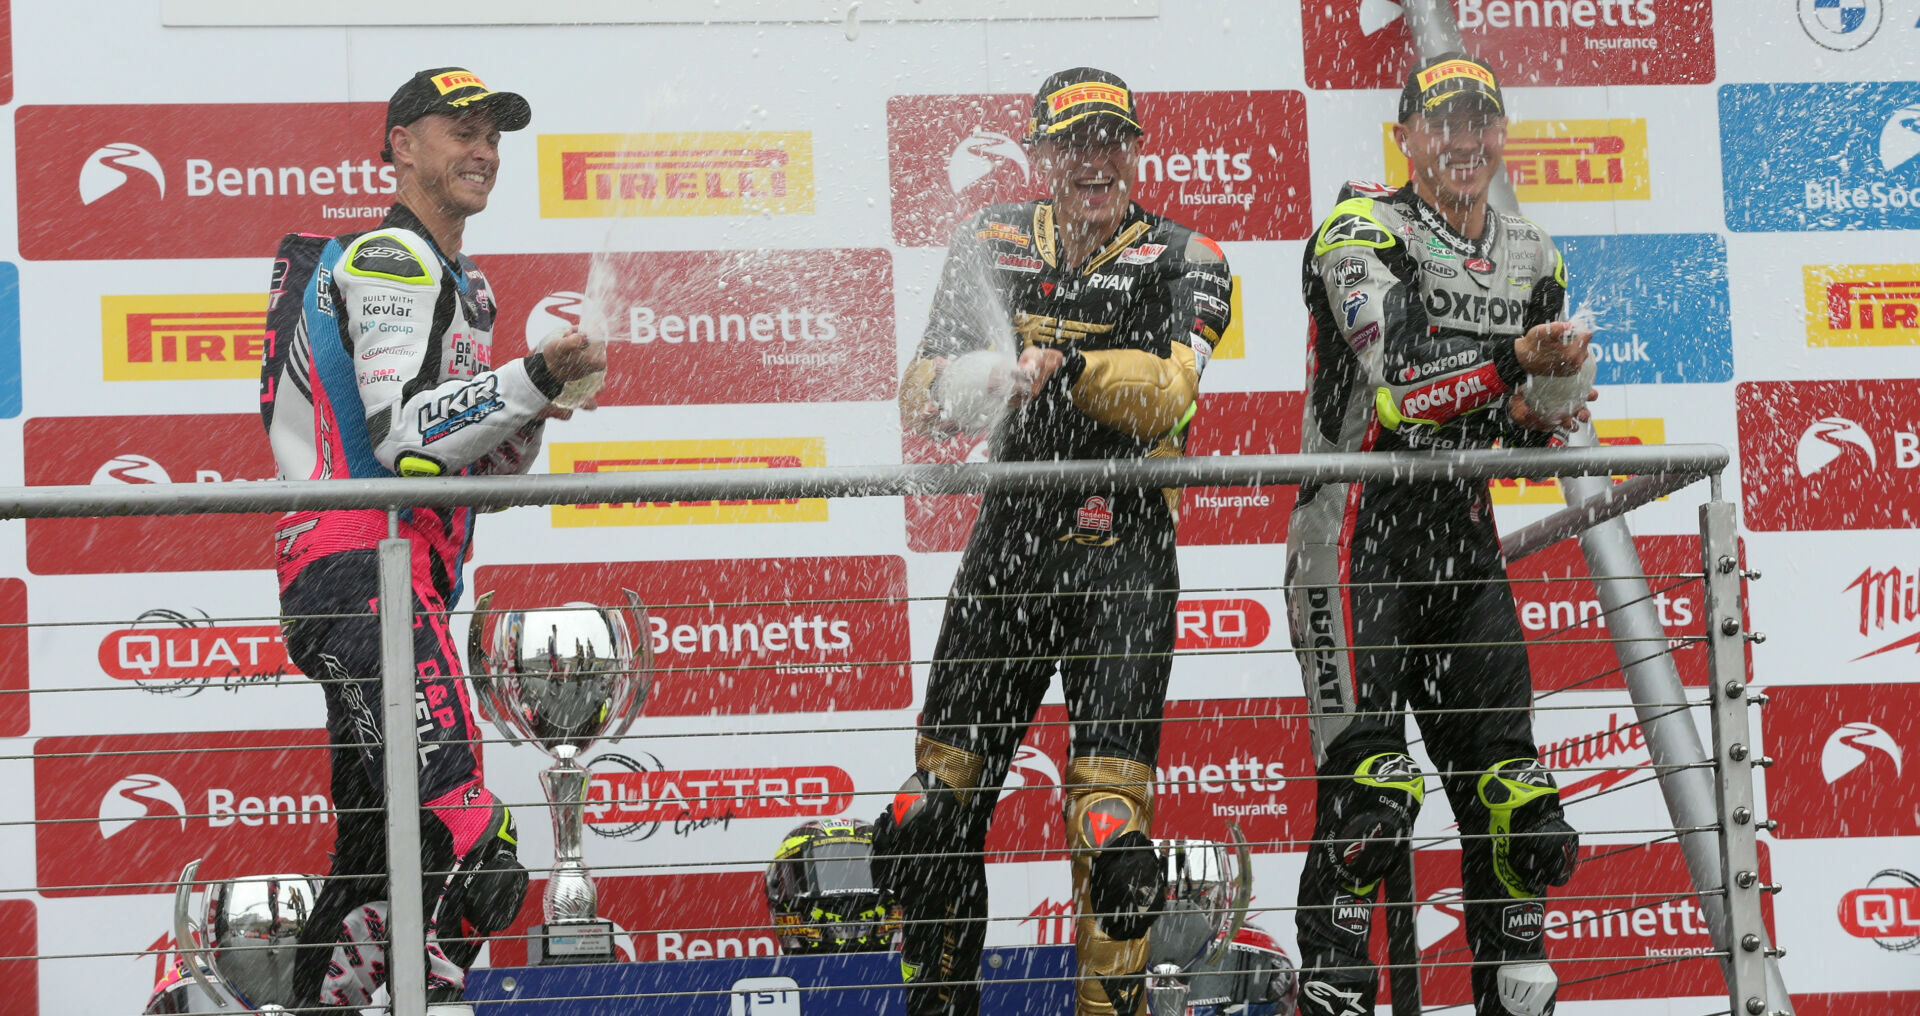 Race One winner Ryan Vickers (center), runner-up Danny Kent (left) and third-place finisher Christian Iddon (right) on the podium at Brands Hatch. Photo courtesy MSVR.